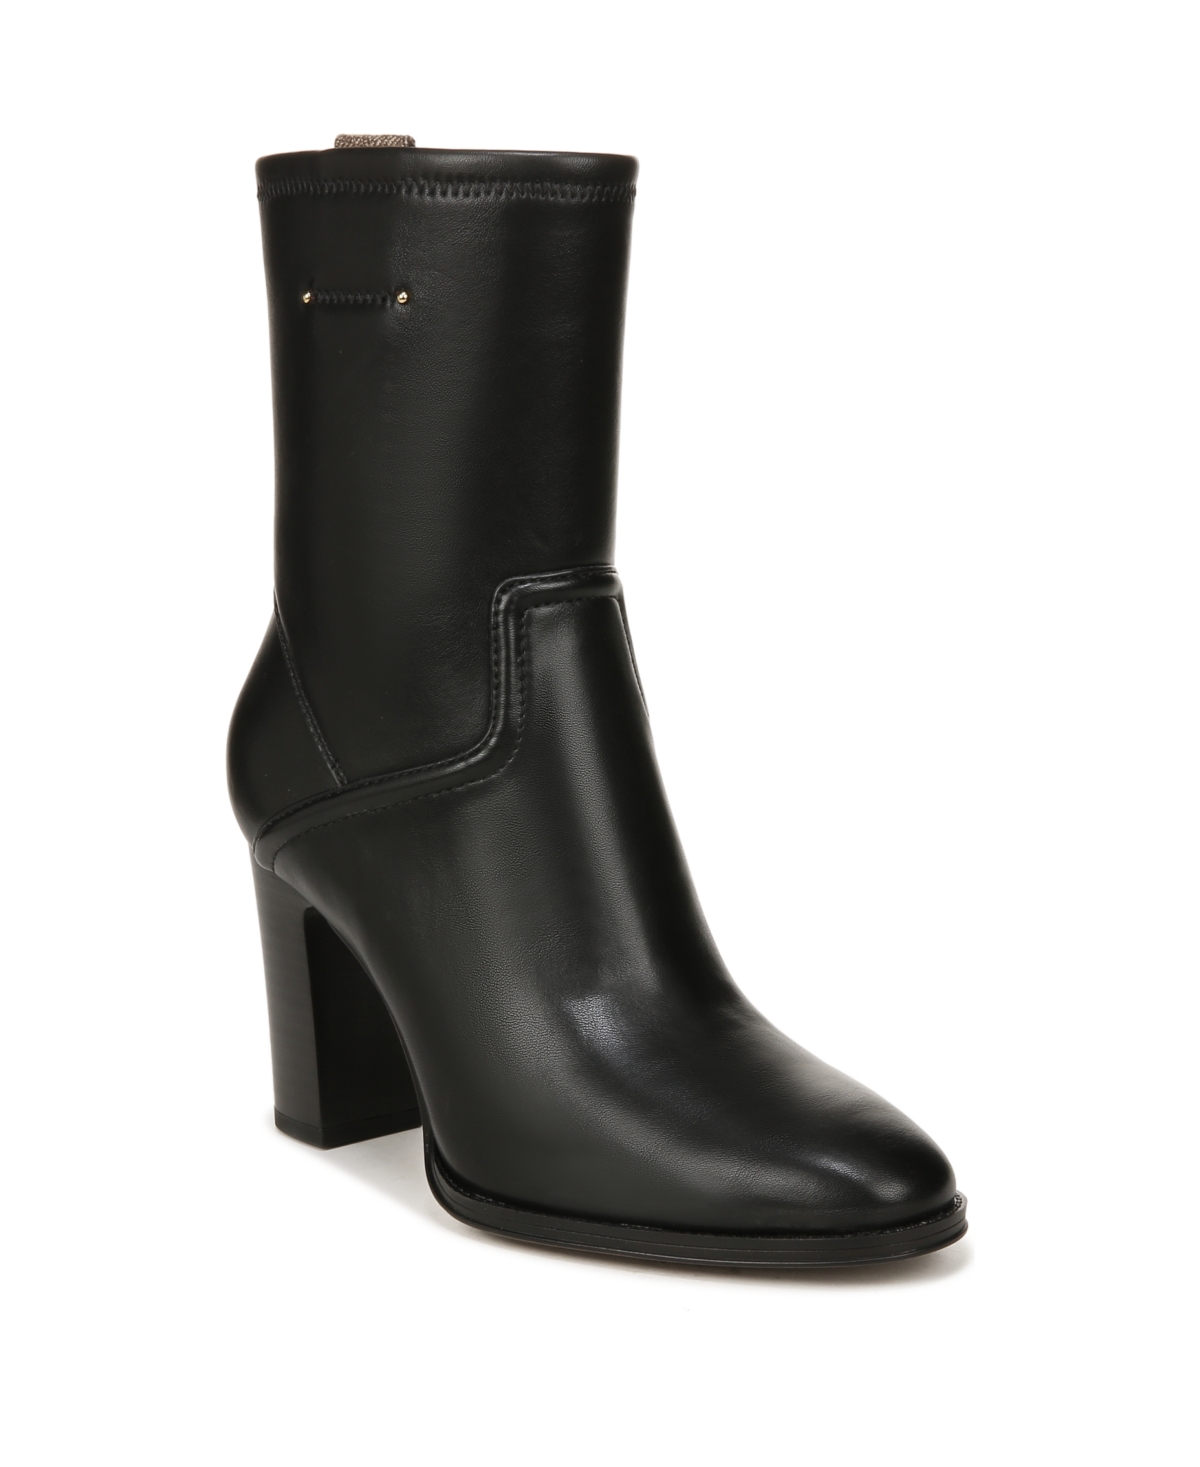 Informa Whit Booties - Black Faux Leather